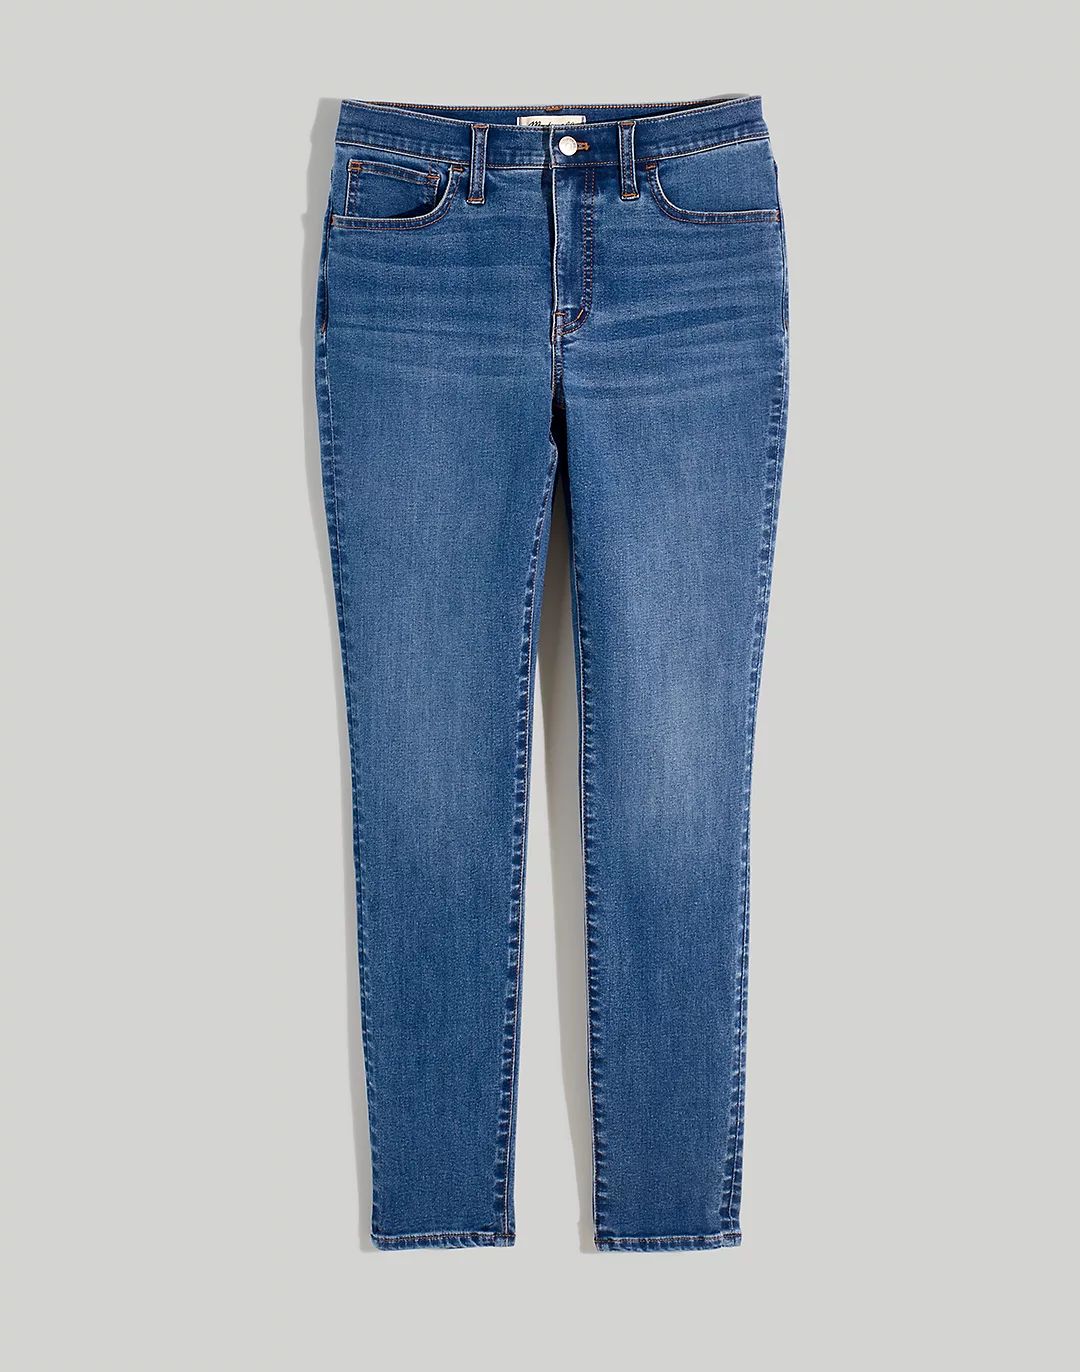 9" Mid-Rise Roadtripper Supersoft Skinny Jeans in Hastings Wash | Madewell